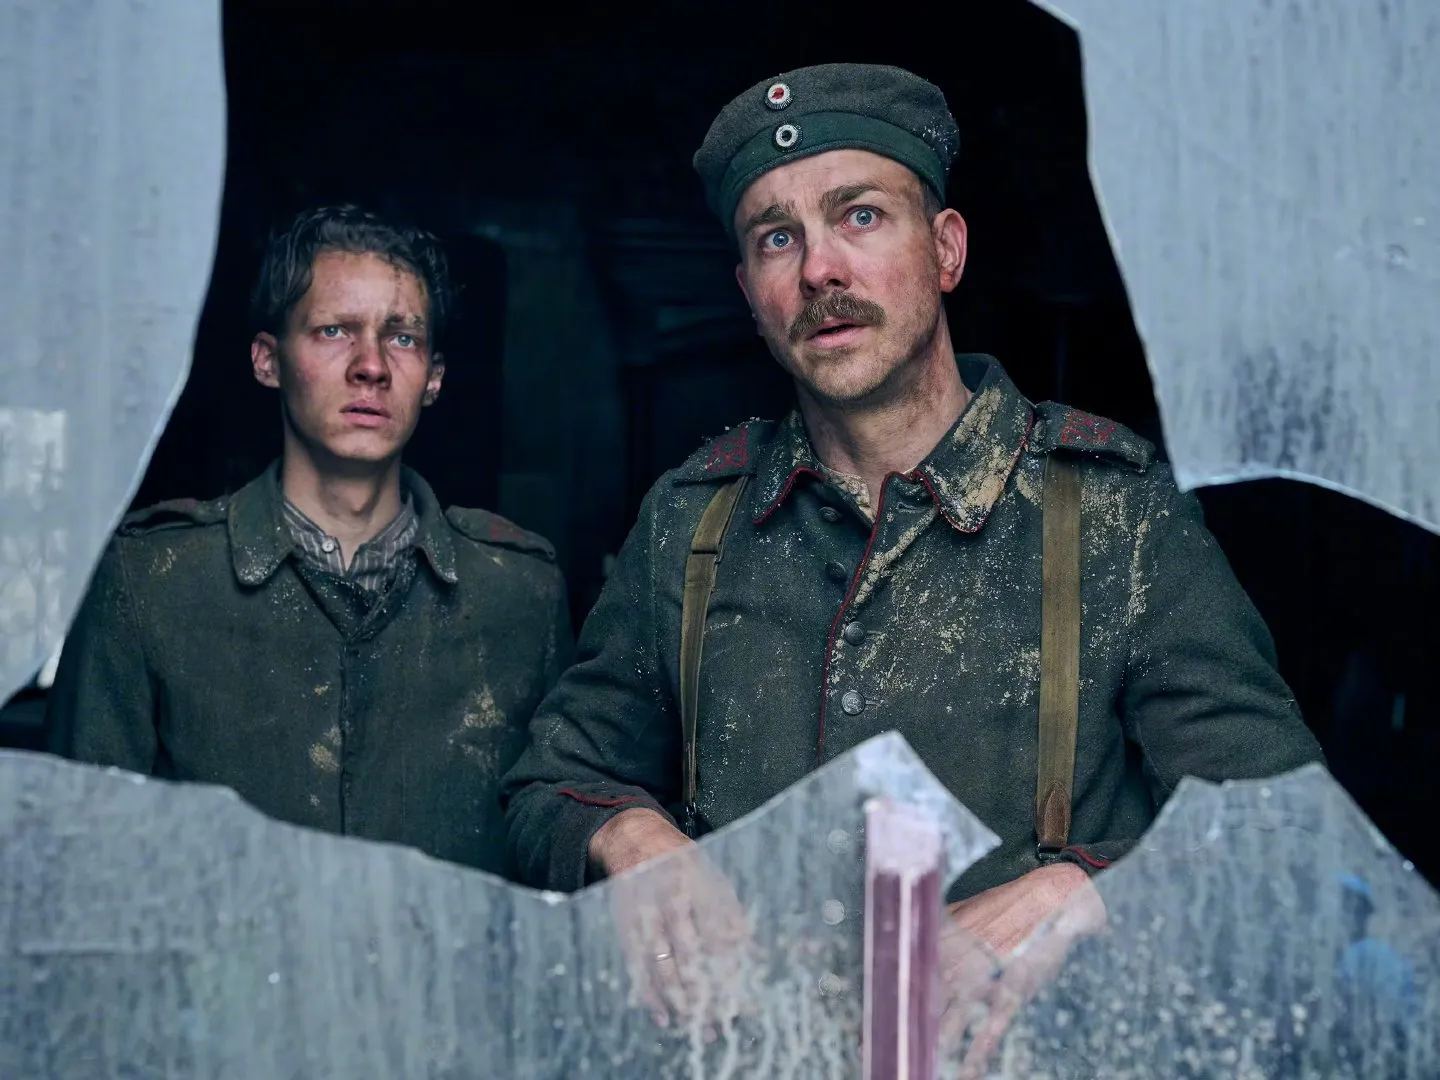 The new version of 'All Quiet on the Western Front‎' is set for theatrical release on September 29, 2022 in Germany and some other markets around the world | FMV6